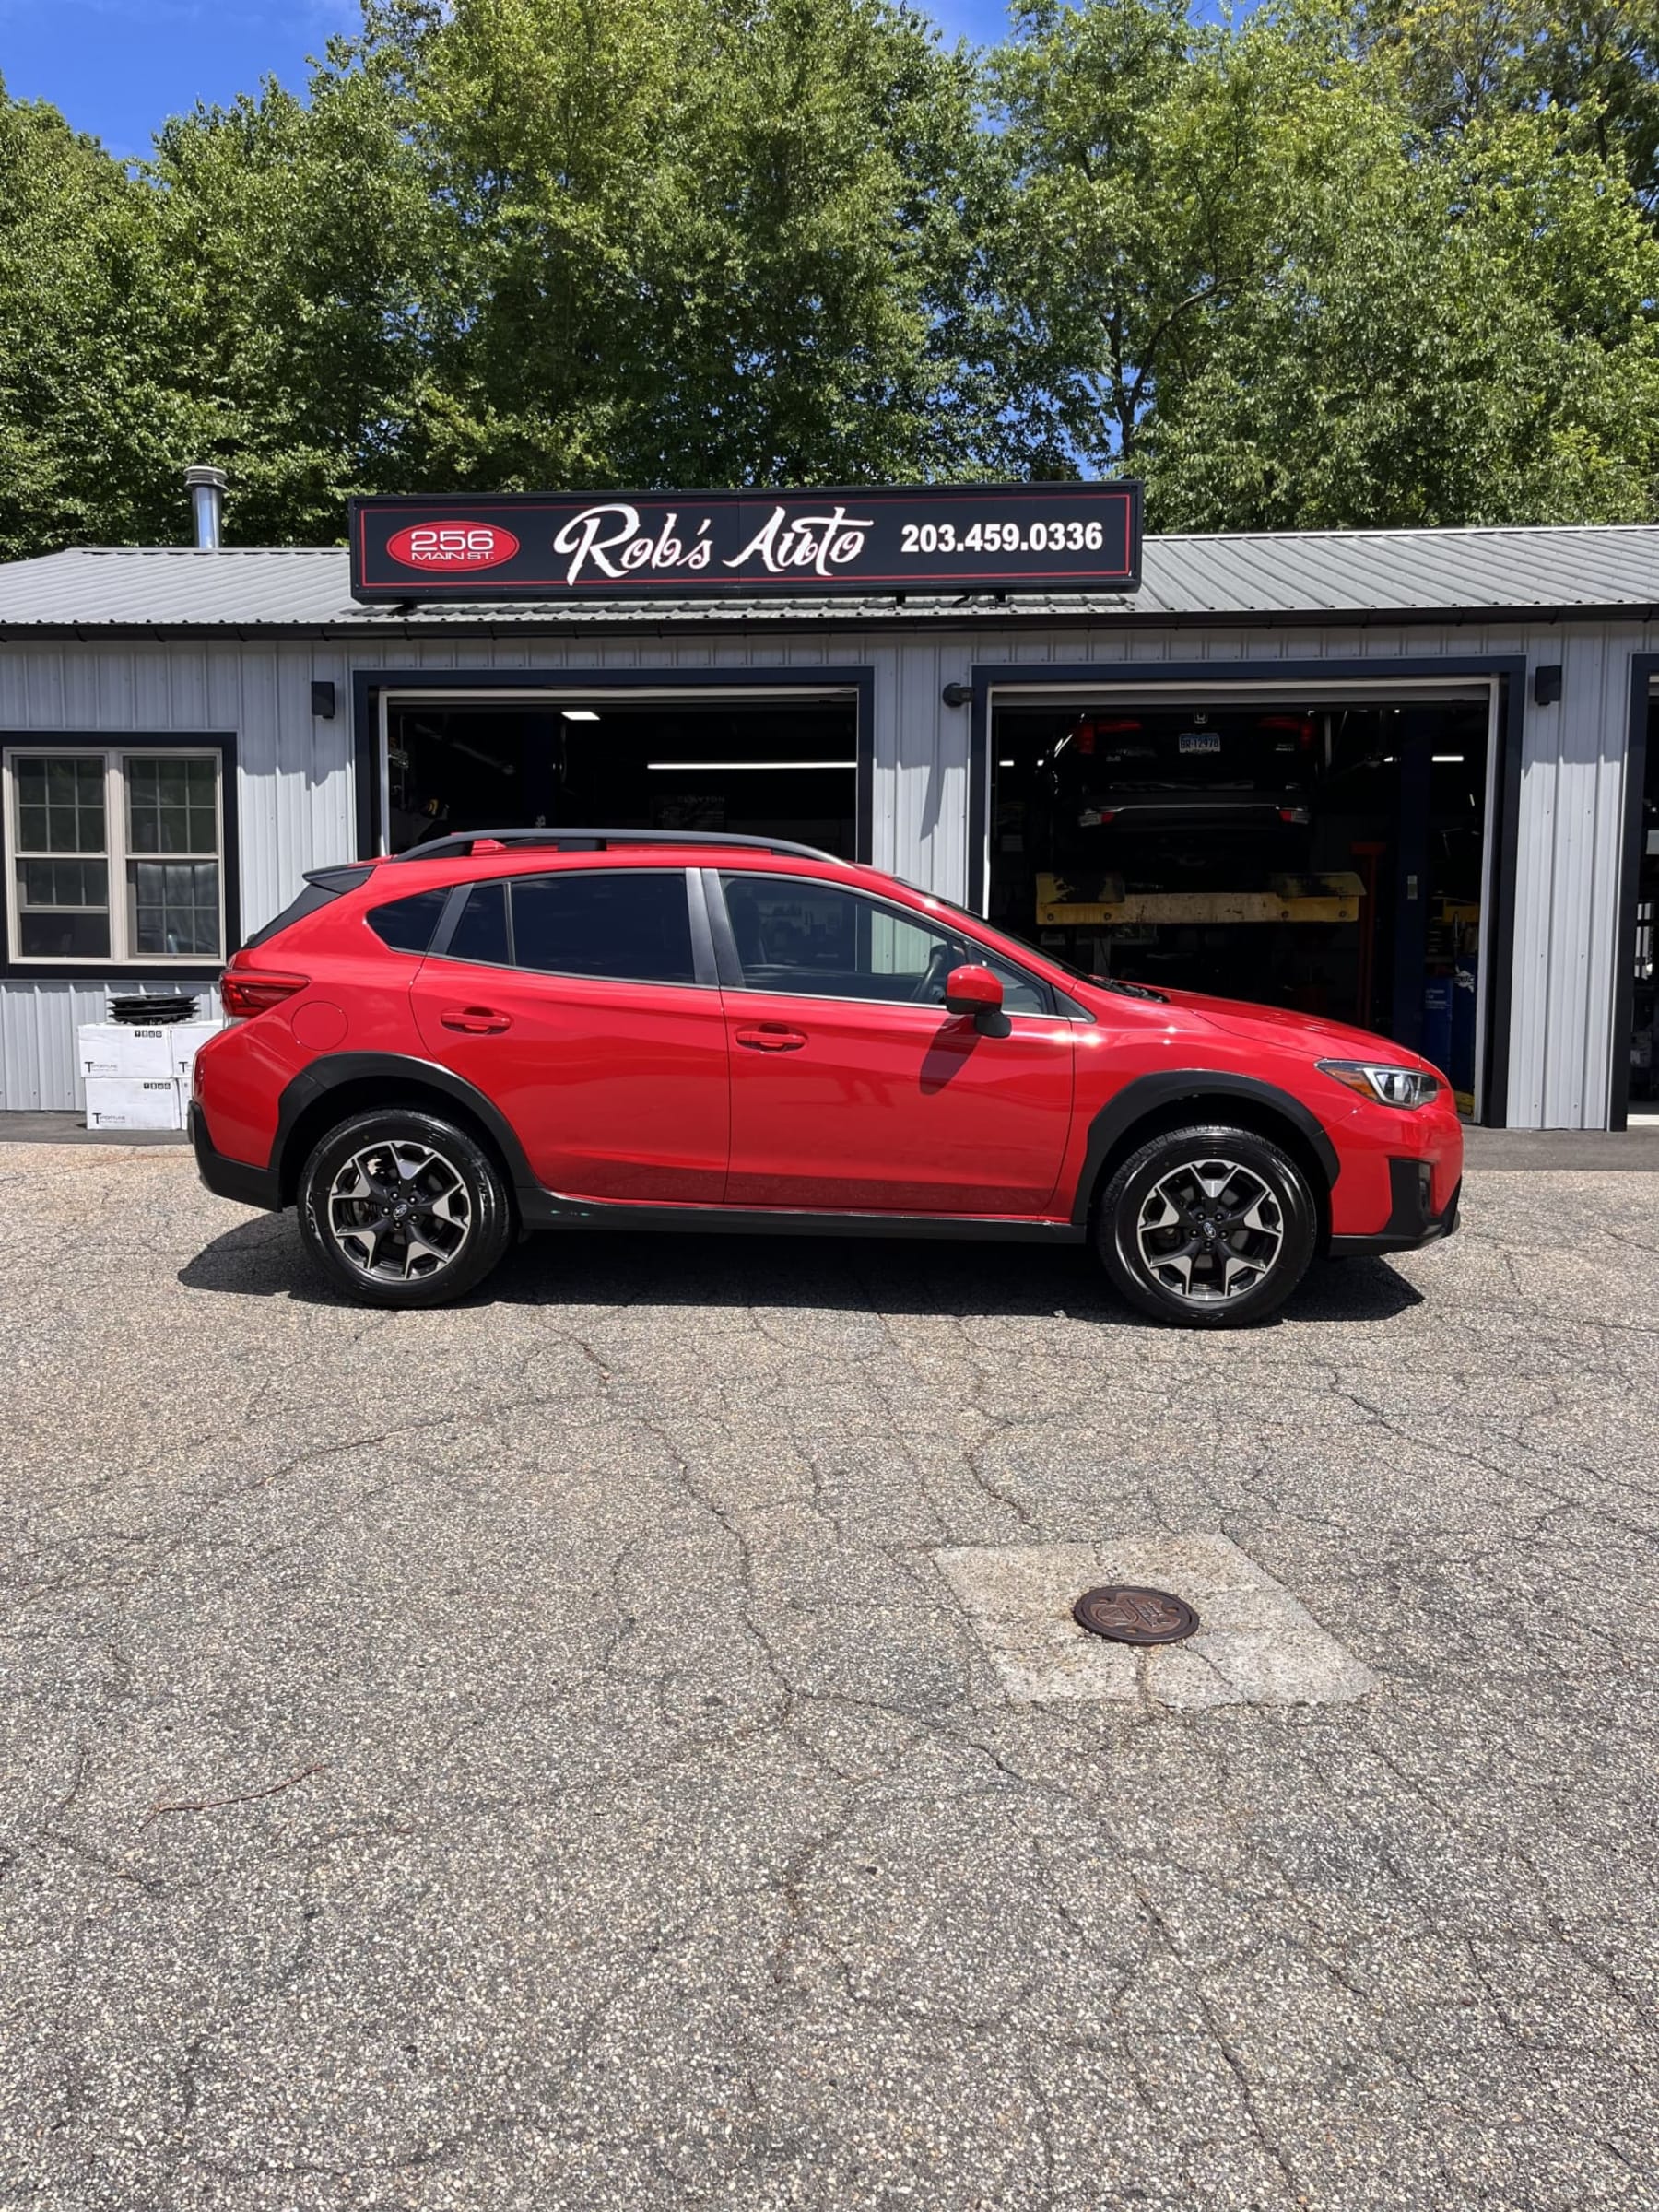 NEW ARRIVAL!! 2020 Subaru Crosstrek Premium!! One owner car!! Clean carfax!! AWD! Heated seats, backup camera, Apple CarPlay, lane departure warning, Bluetooth and much much more! ONLY 60,000 miles! Runs and Drives New!! Won’t last at $22,900!